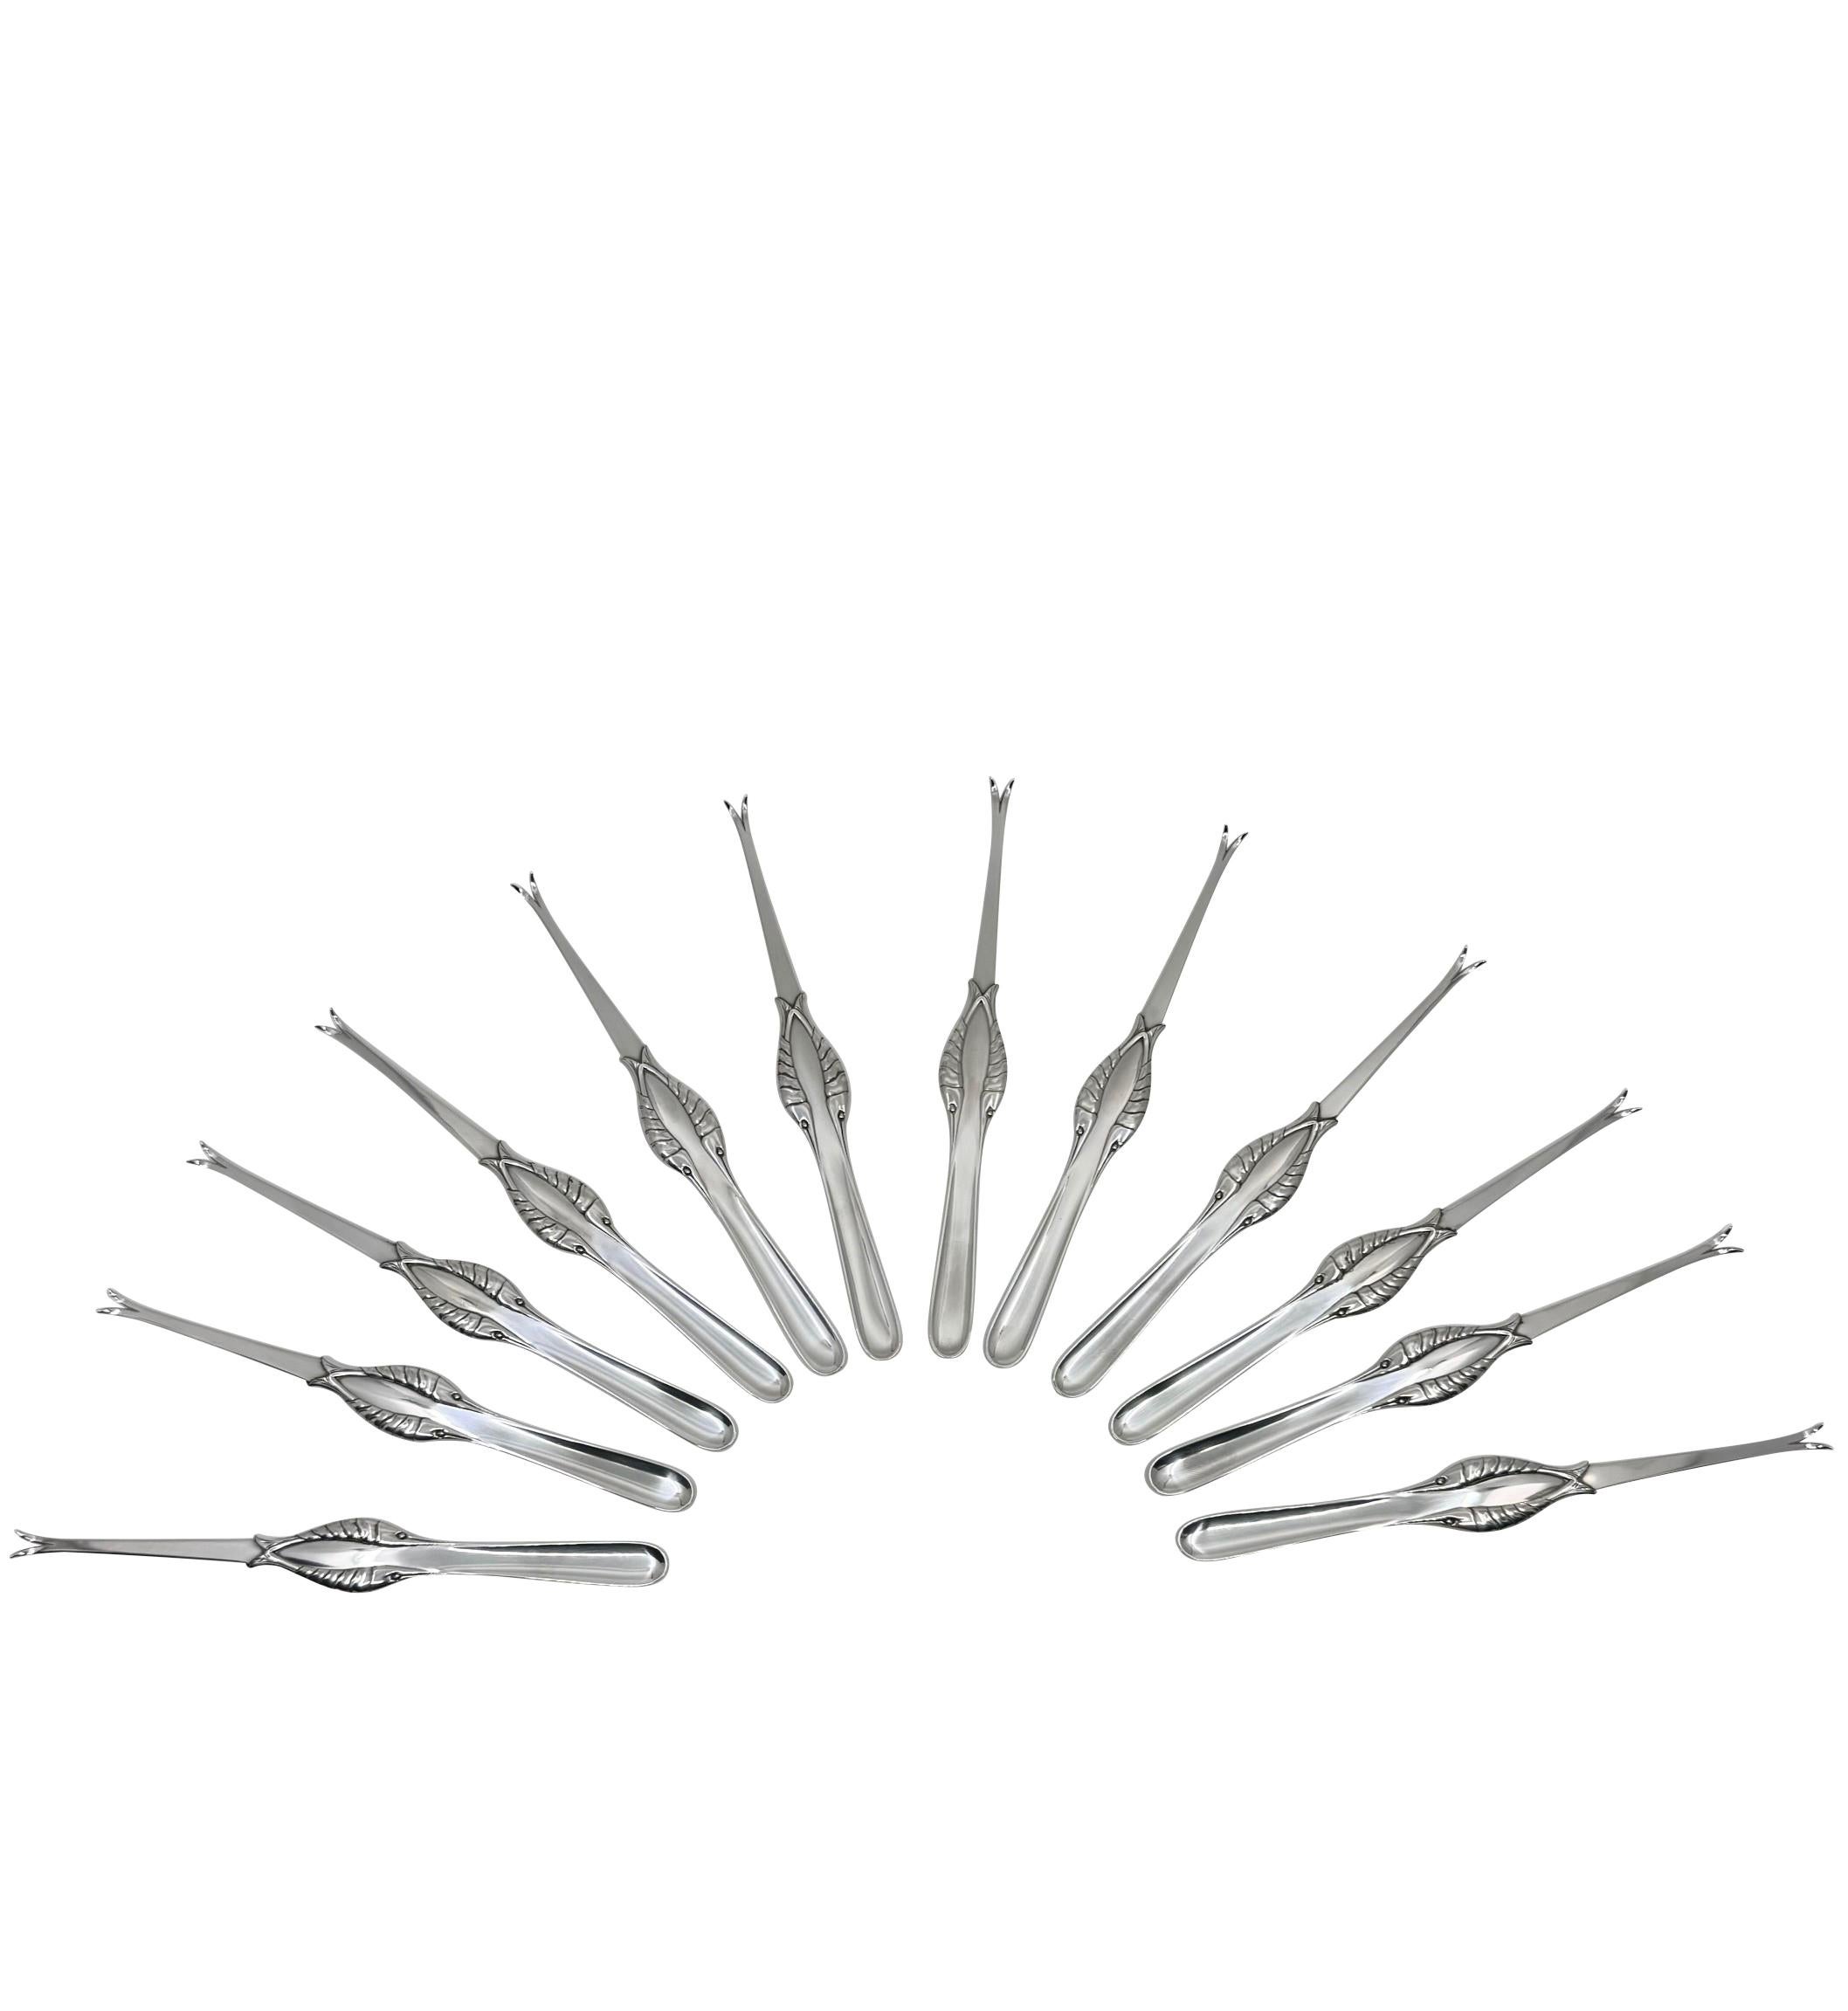 A set twelve Georg Jensen sterling silver lobster picks/forks, featuring the ornamental Pattern #86 crafted by Georg Jensen in 1930. Handmade at the Georg Jensen silver smithy in Denmark, each piece has a two-pronged fork adorned with meticulously